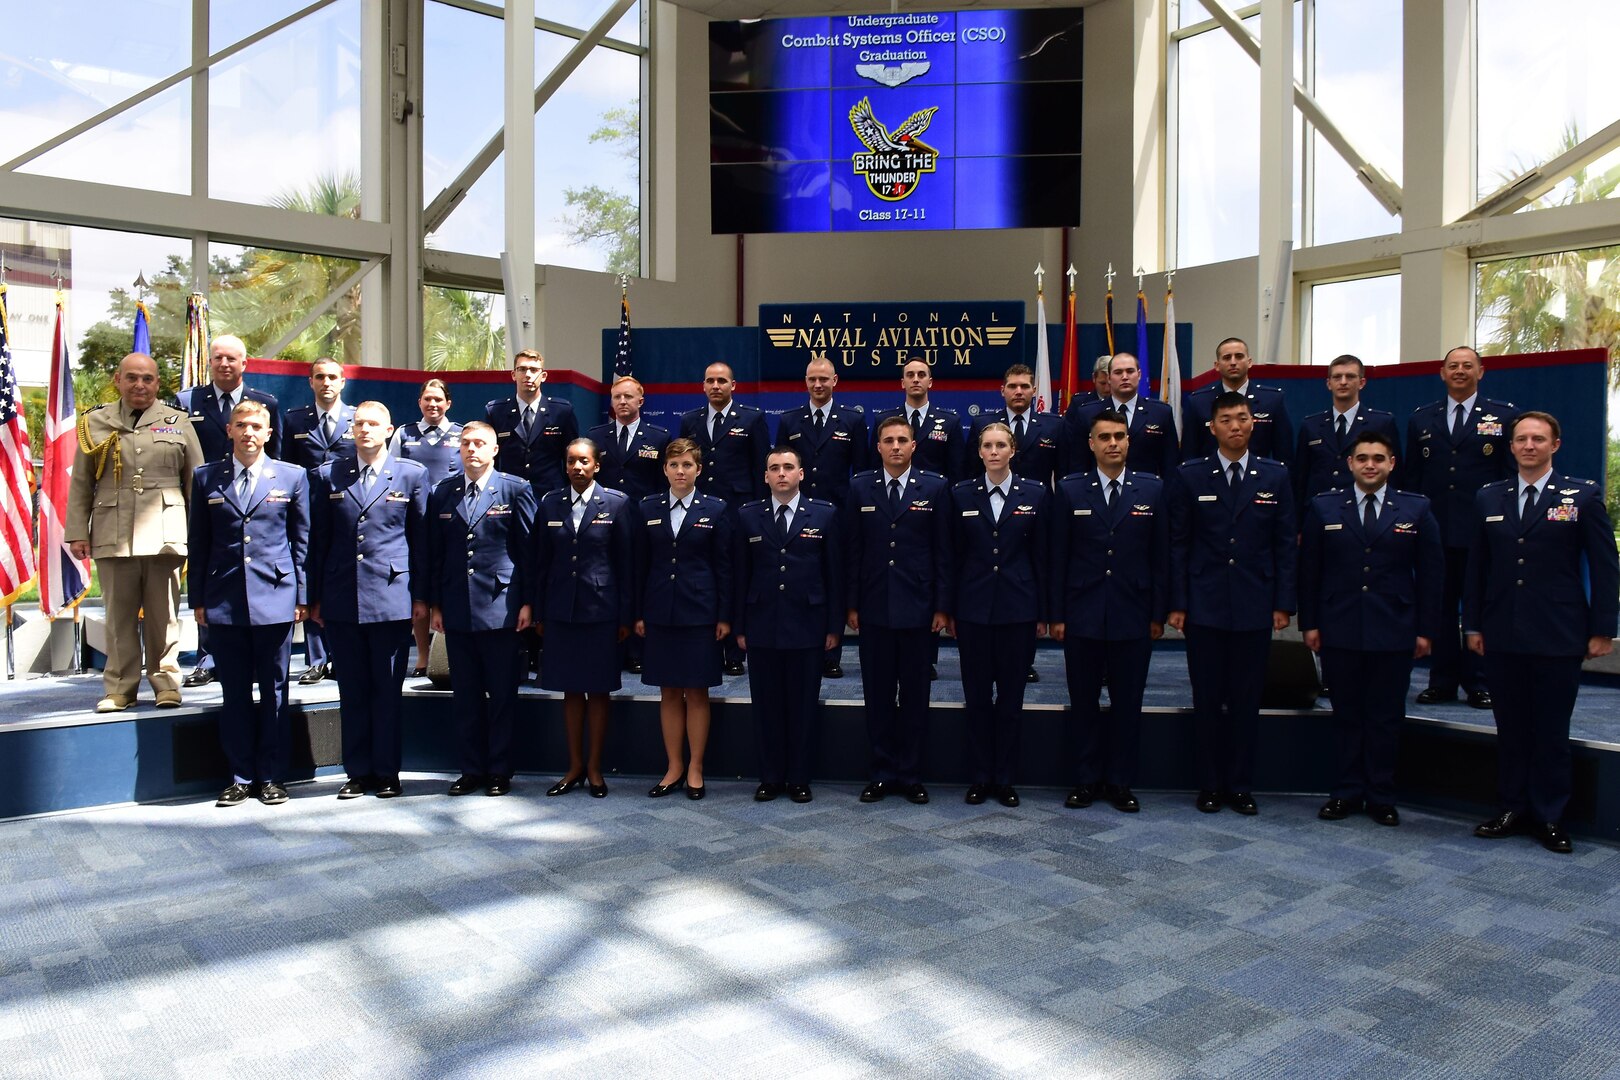 Air Chief Marshal Stuart Peach, Chief of the Defence Staff of the United Kingdom, Col. Joel Carey, 12th Flying Training Wing commander, Col. John Edwards, 479th Flying Training Group commander and Combat Systems Officer Class 17-11 pose for a group photo inside the Naval Aviation Museum, Naval Air Station Pensacola, Florida, June 23, 2017.